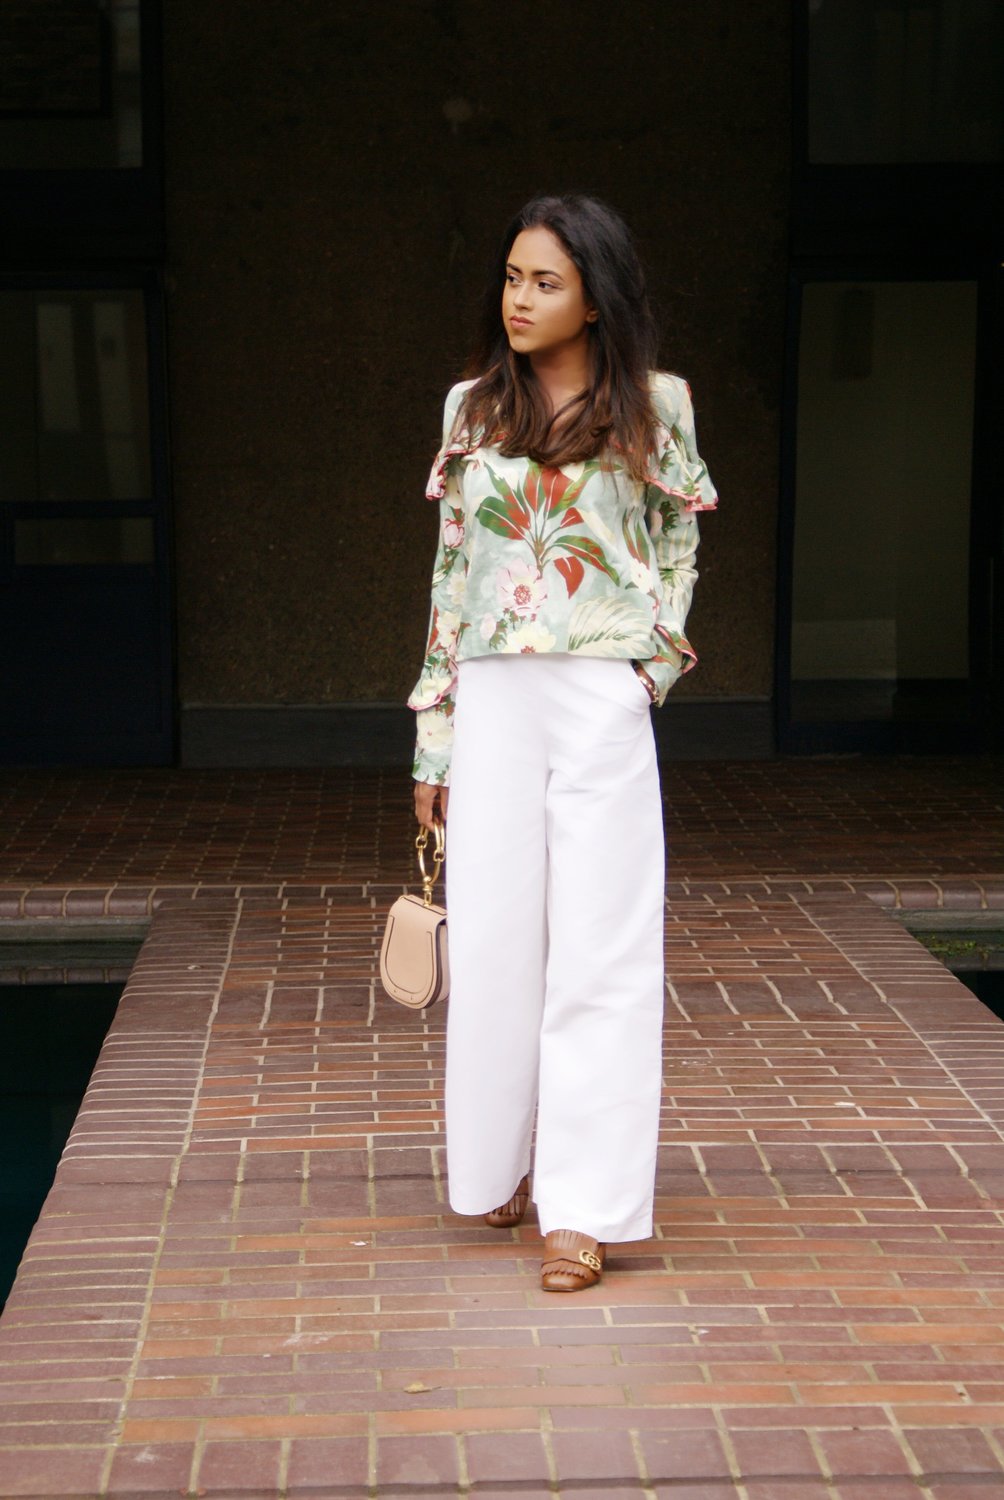 Sachini wearing a floral top and brown Gucci shoes holding a pink Chloé bag